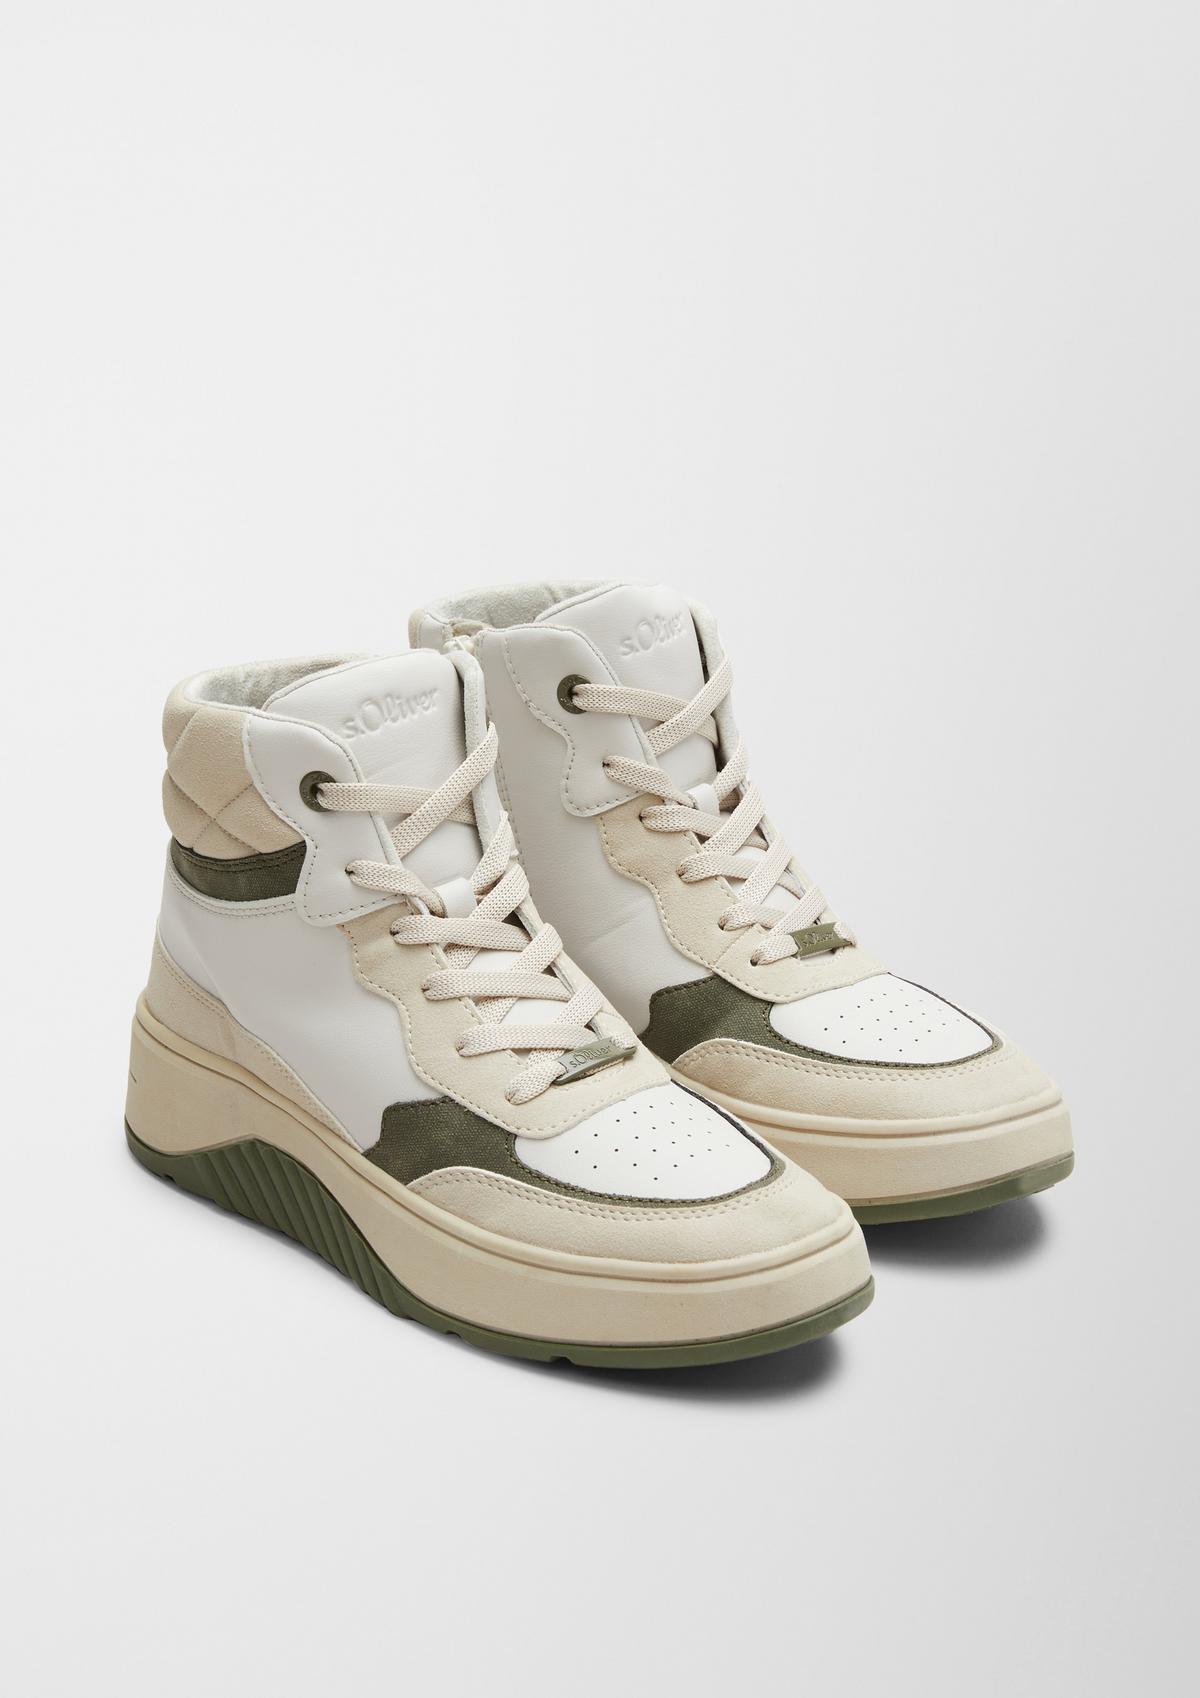 s.Oliver High Sneaker im Fabricmix